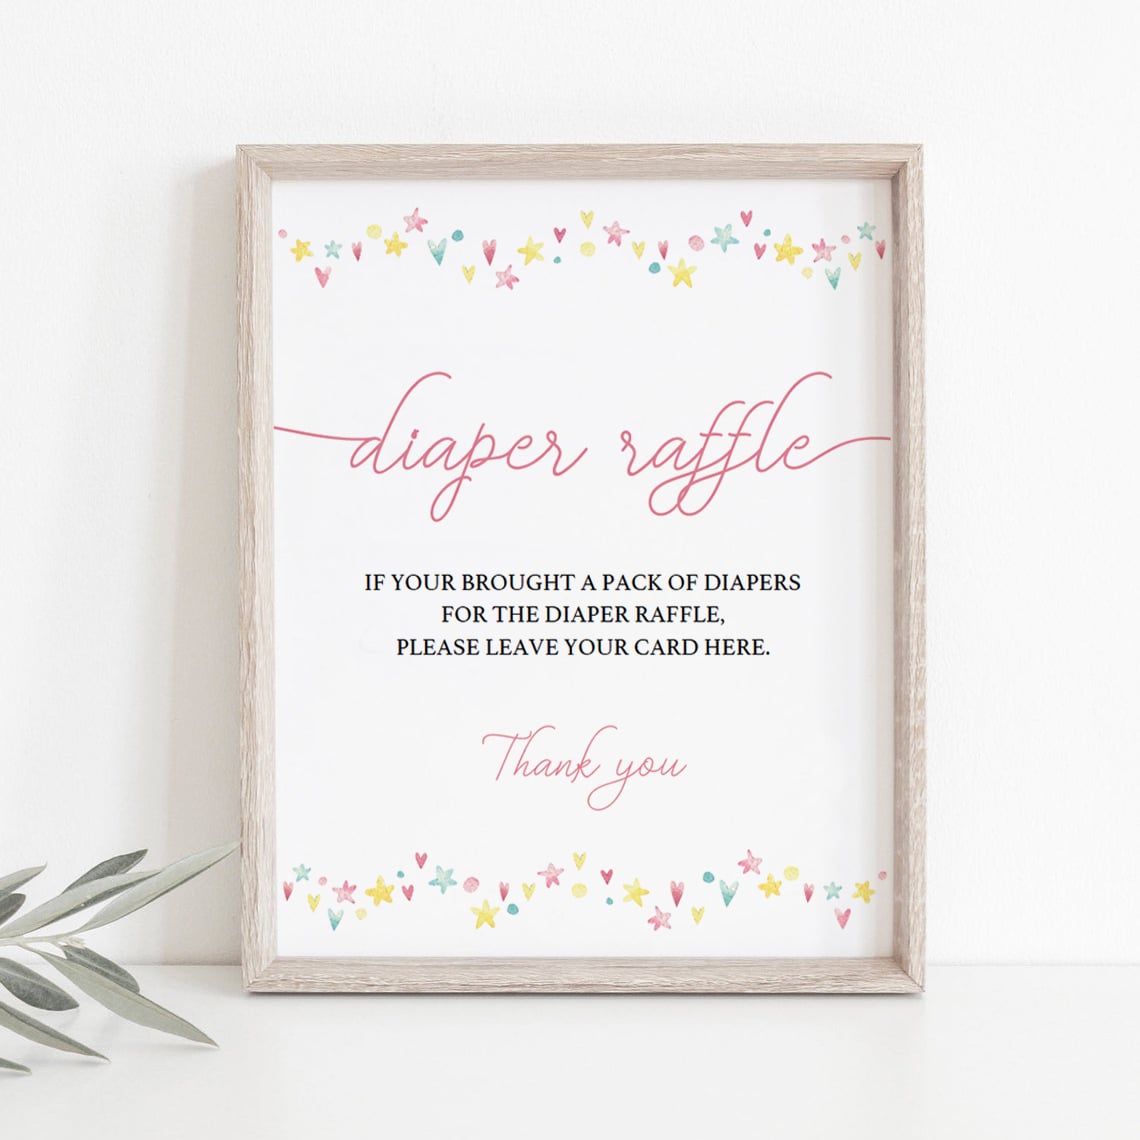 Girl baby shower diaper raffle table sign printable by LittleSizzle